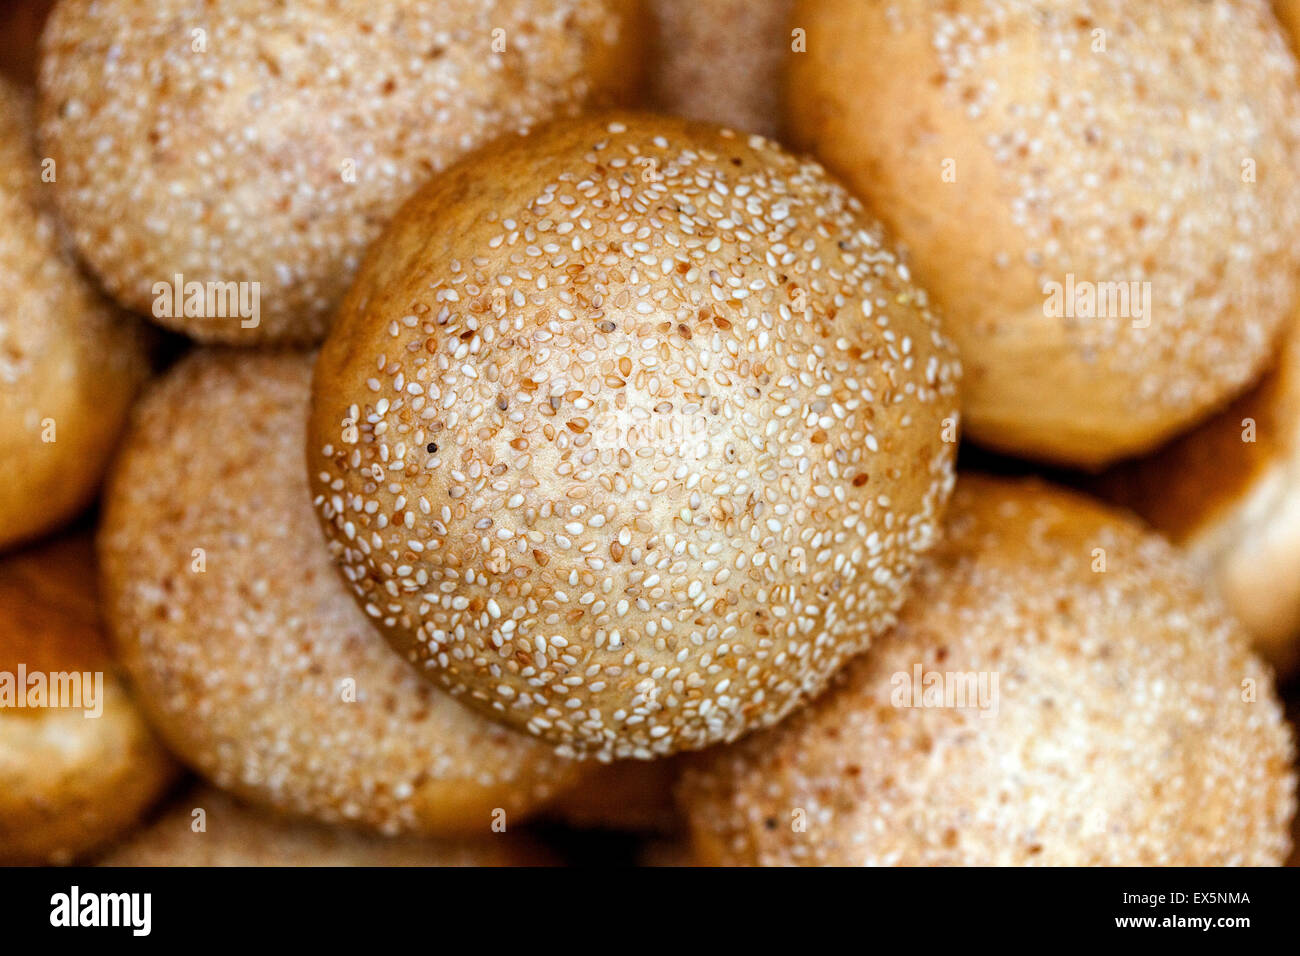 Bread buns with sesame seeds on top Stock Photo